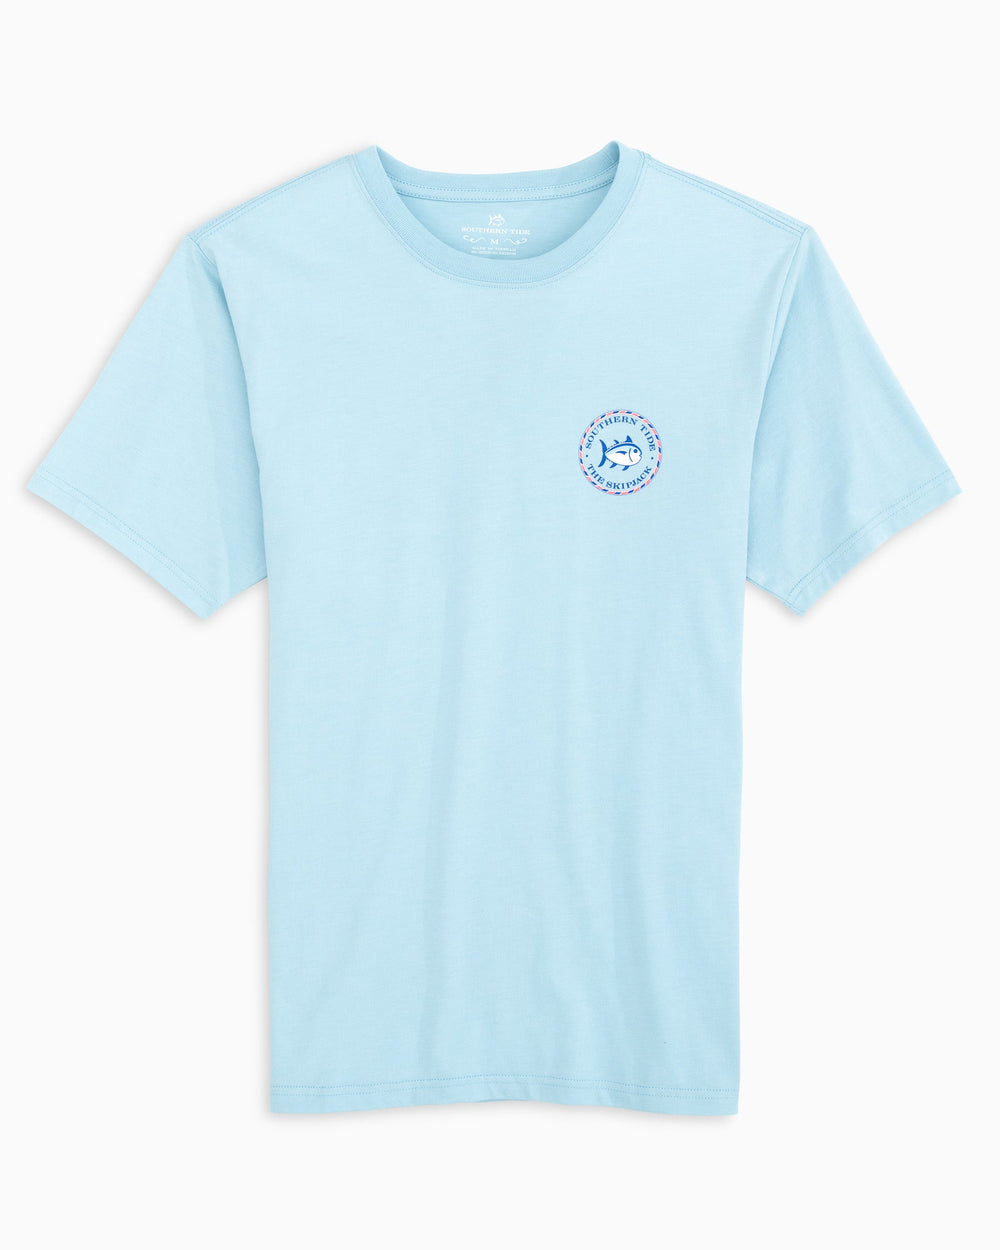 The model front view of the Women's Original Skipjack Medallion T-Shirt by Southern Tide - Dream Blue